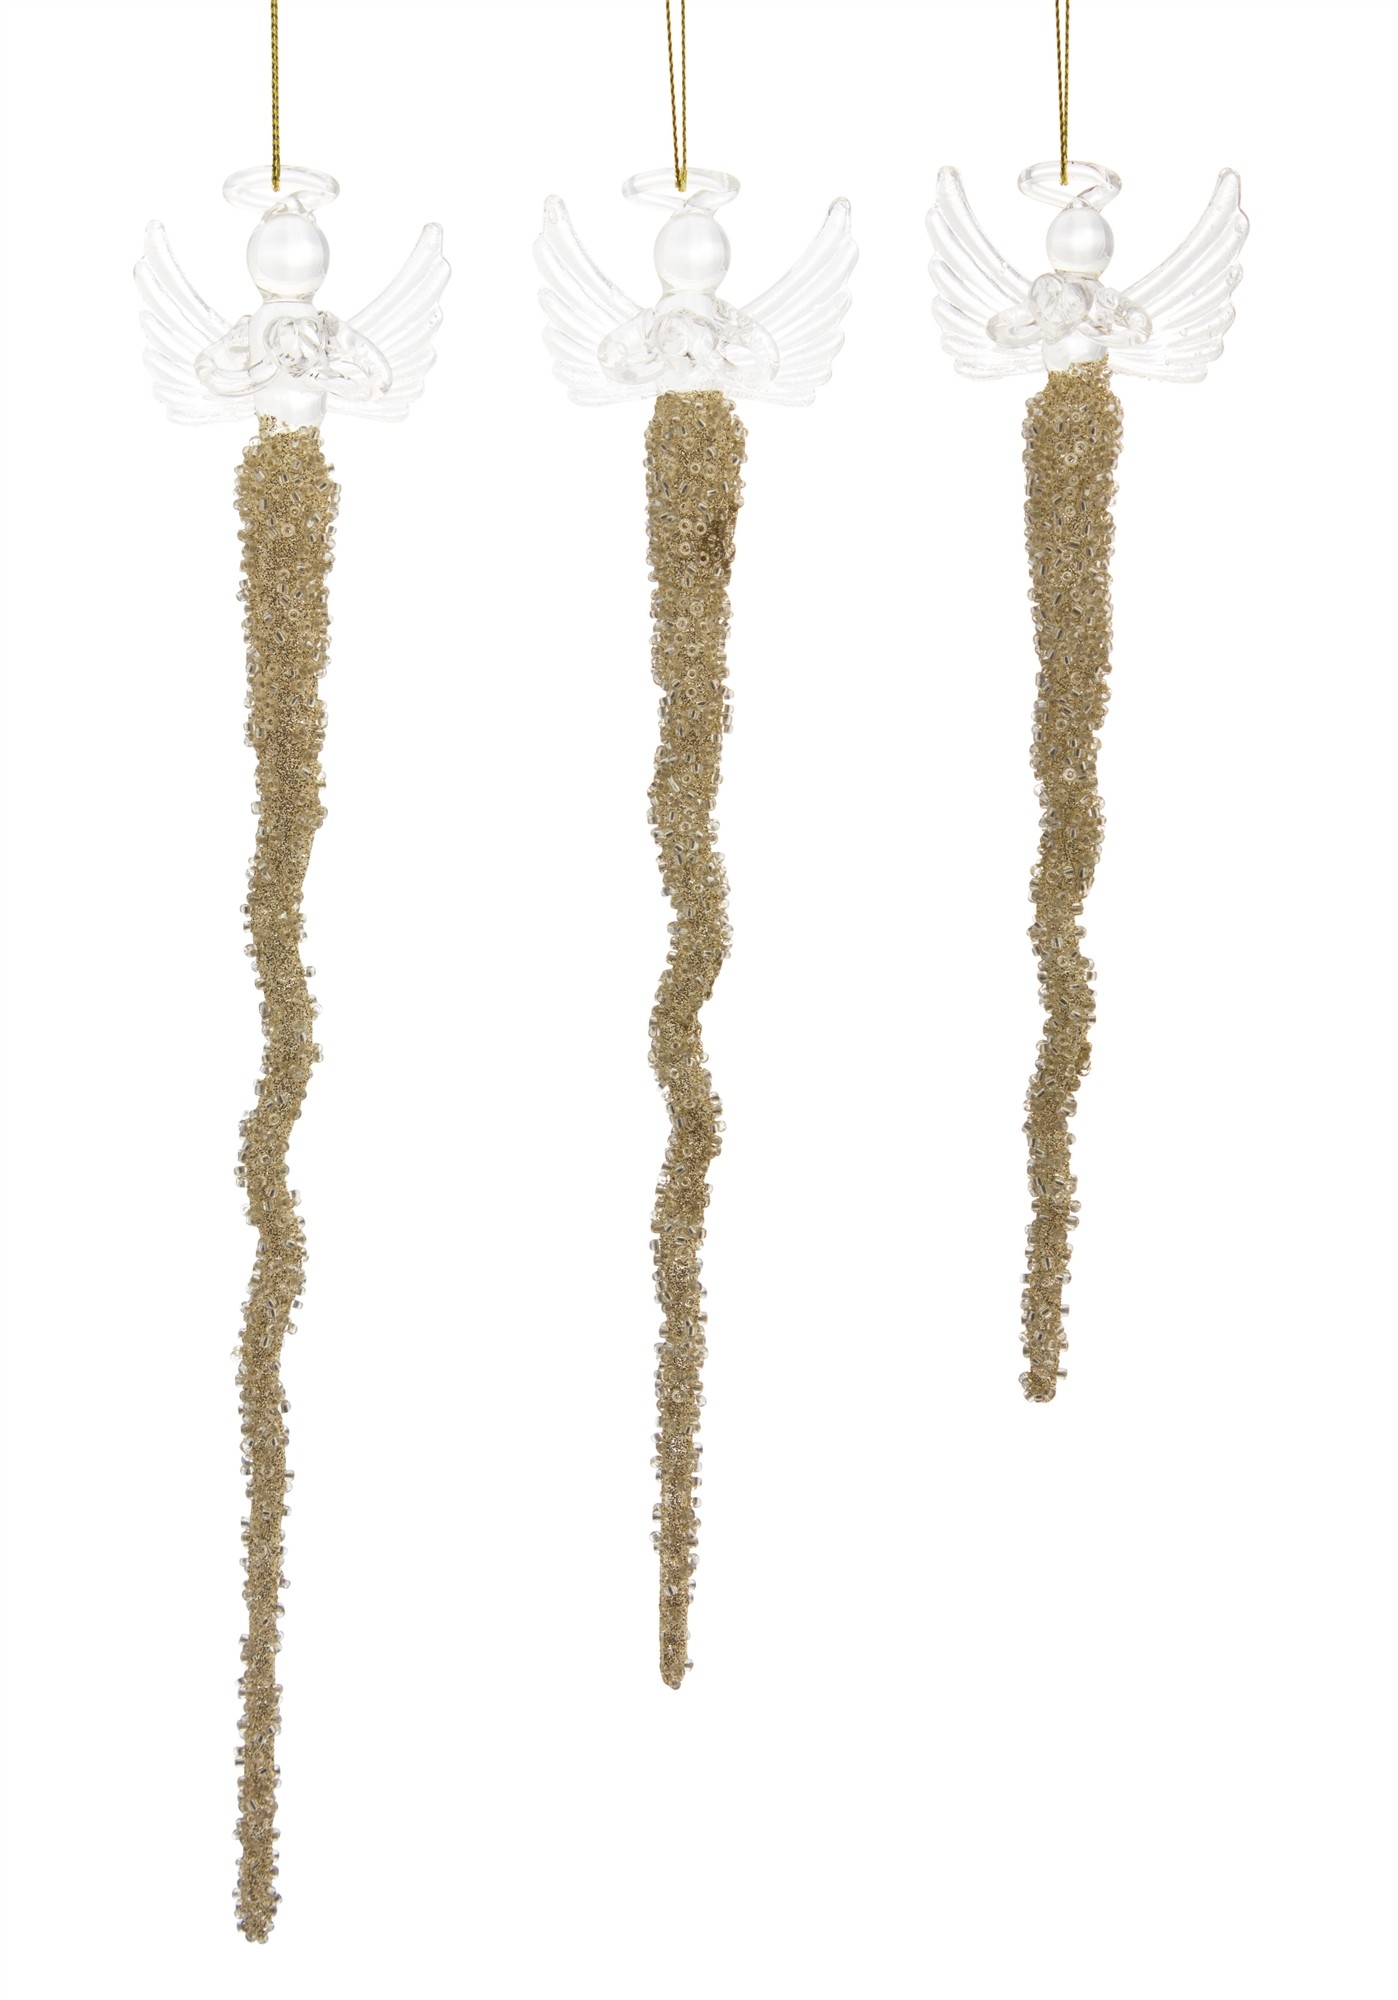 Angel Icicle (Set of 3) 8"H, 9.75"H, 12"H Glass